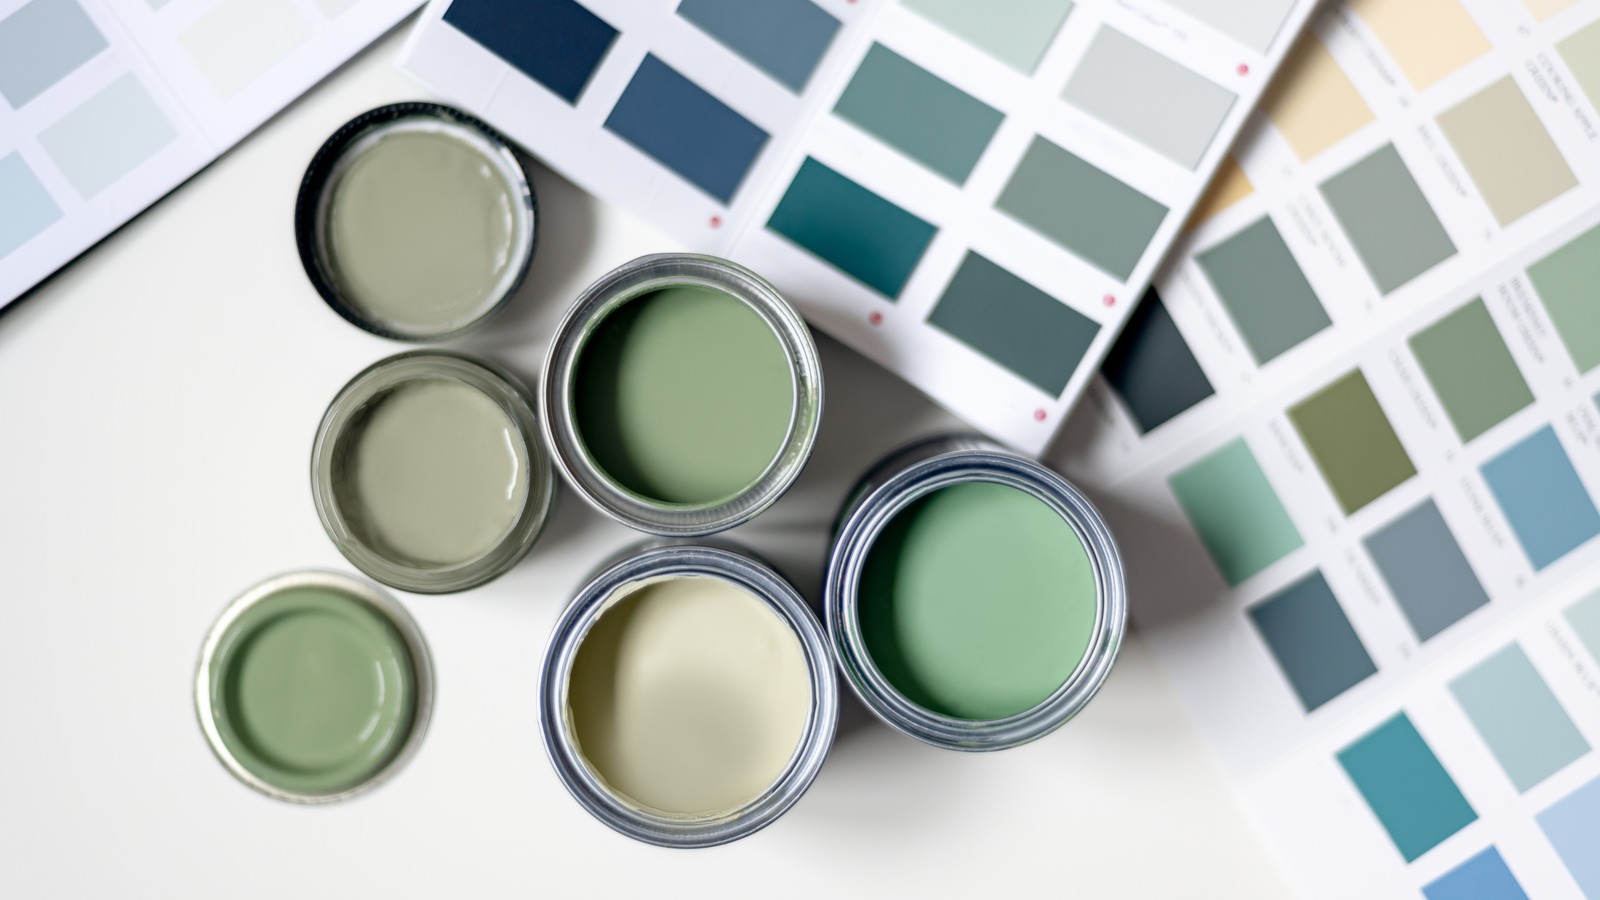 11 Best Bathroom Paint Colors  Small bathroom colors, Small